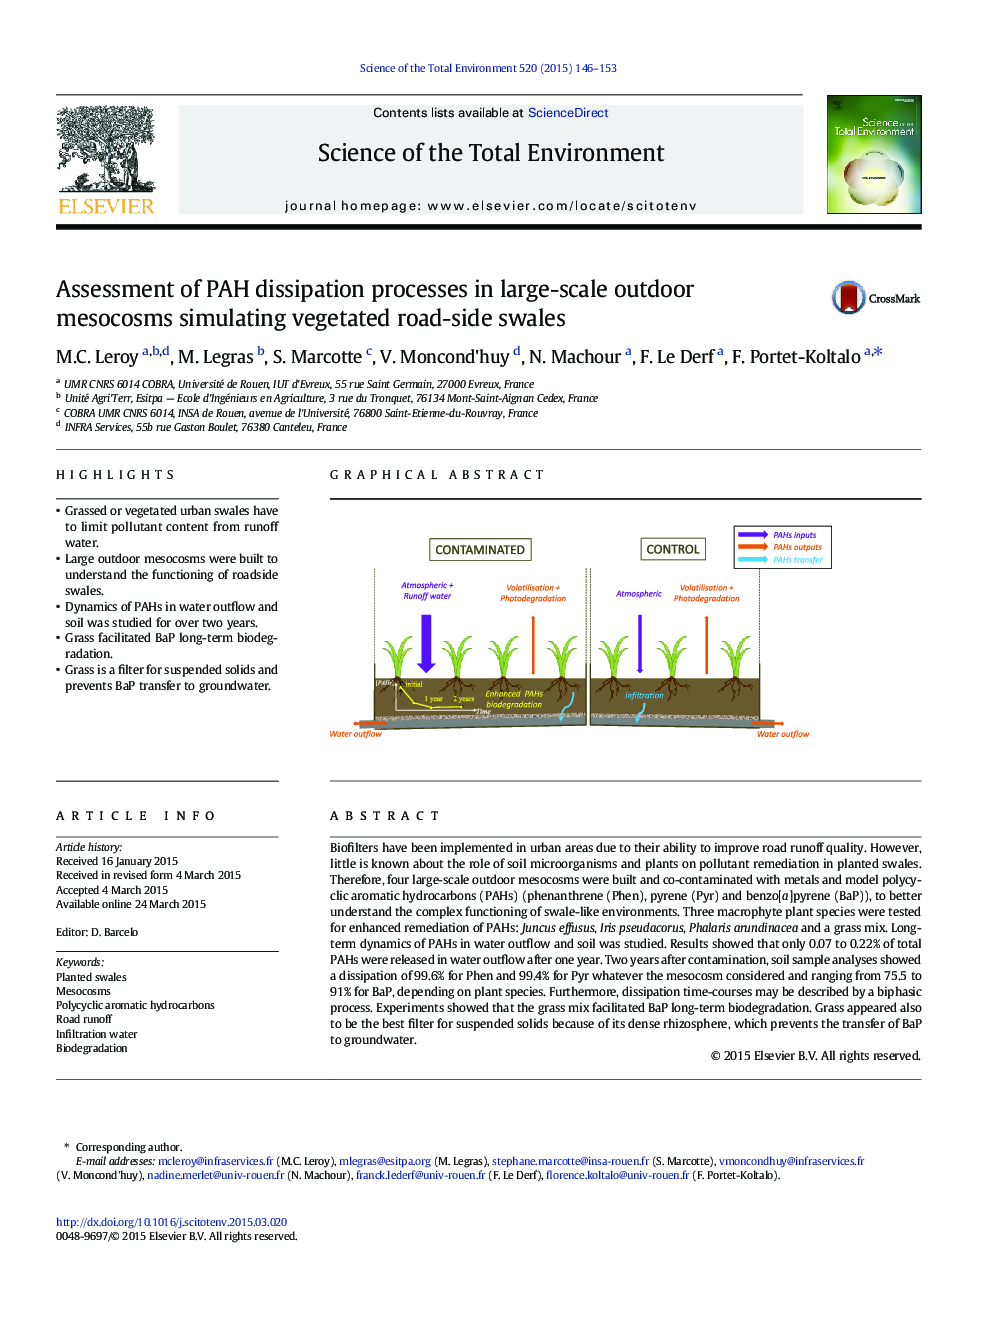 Assessment of PAH dissipation processes in large-scale outdoor mesocosms simulating vegetated road-side swales